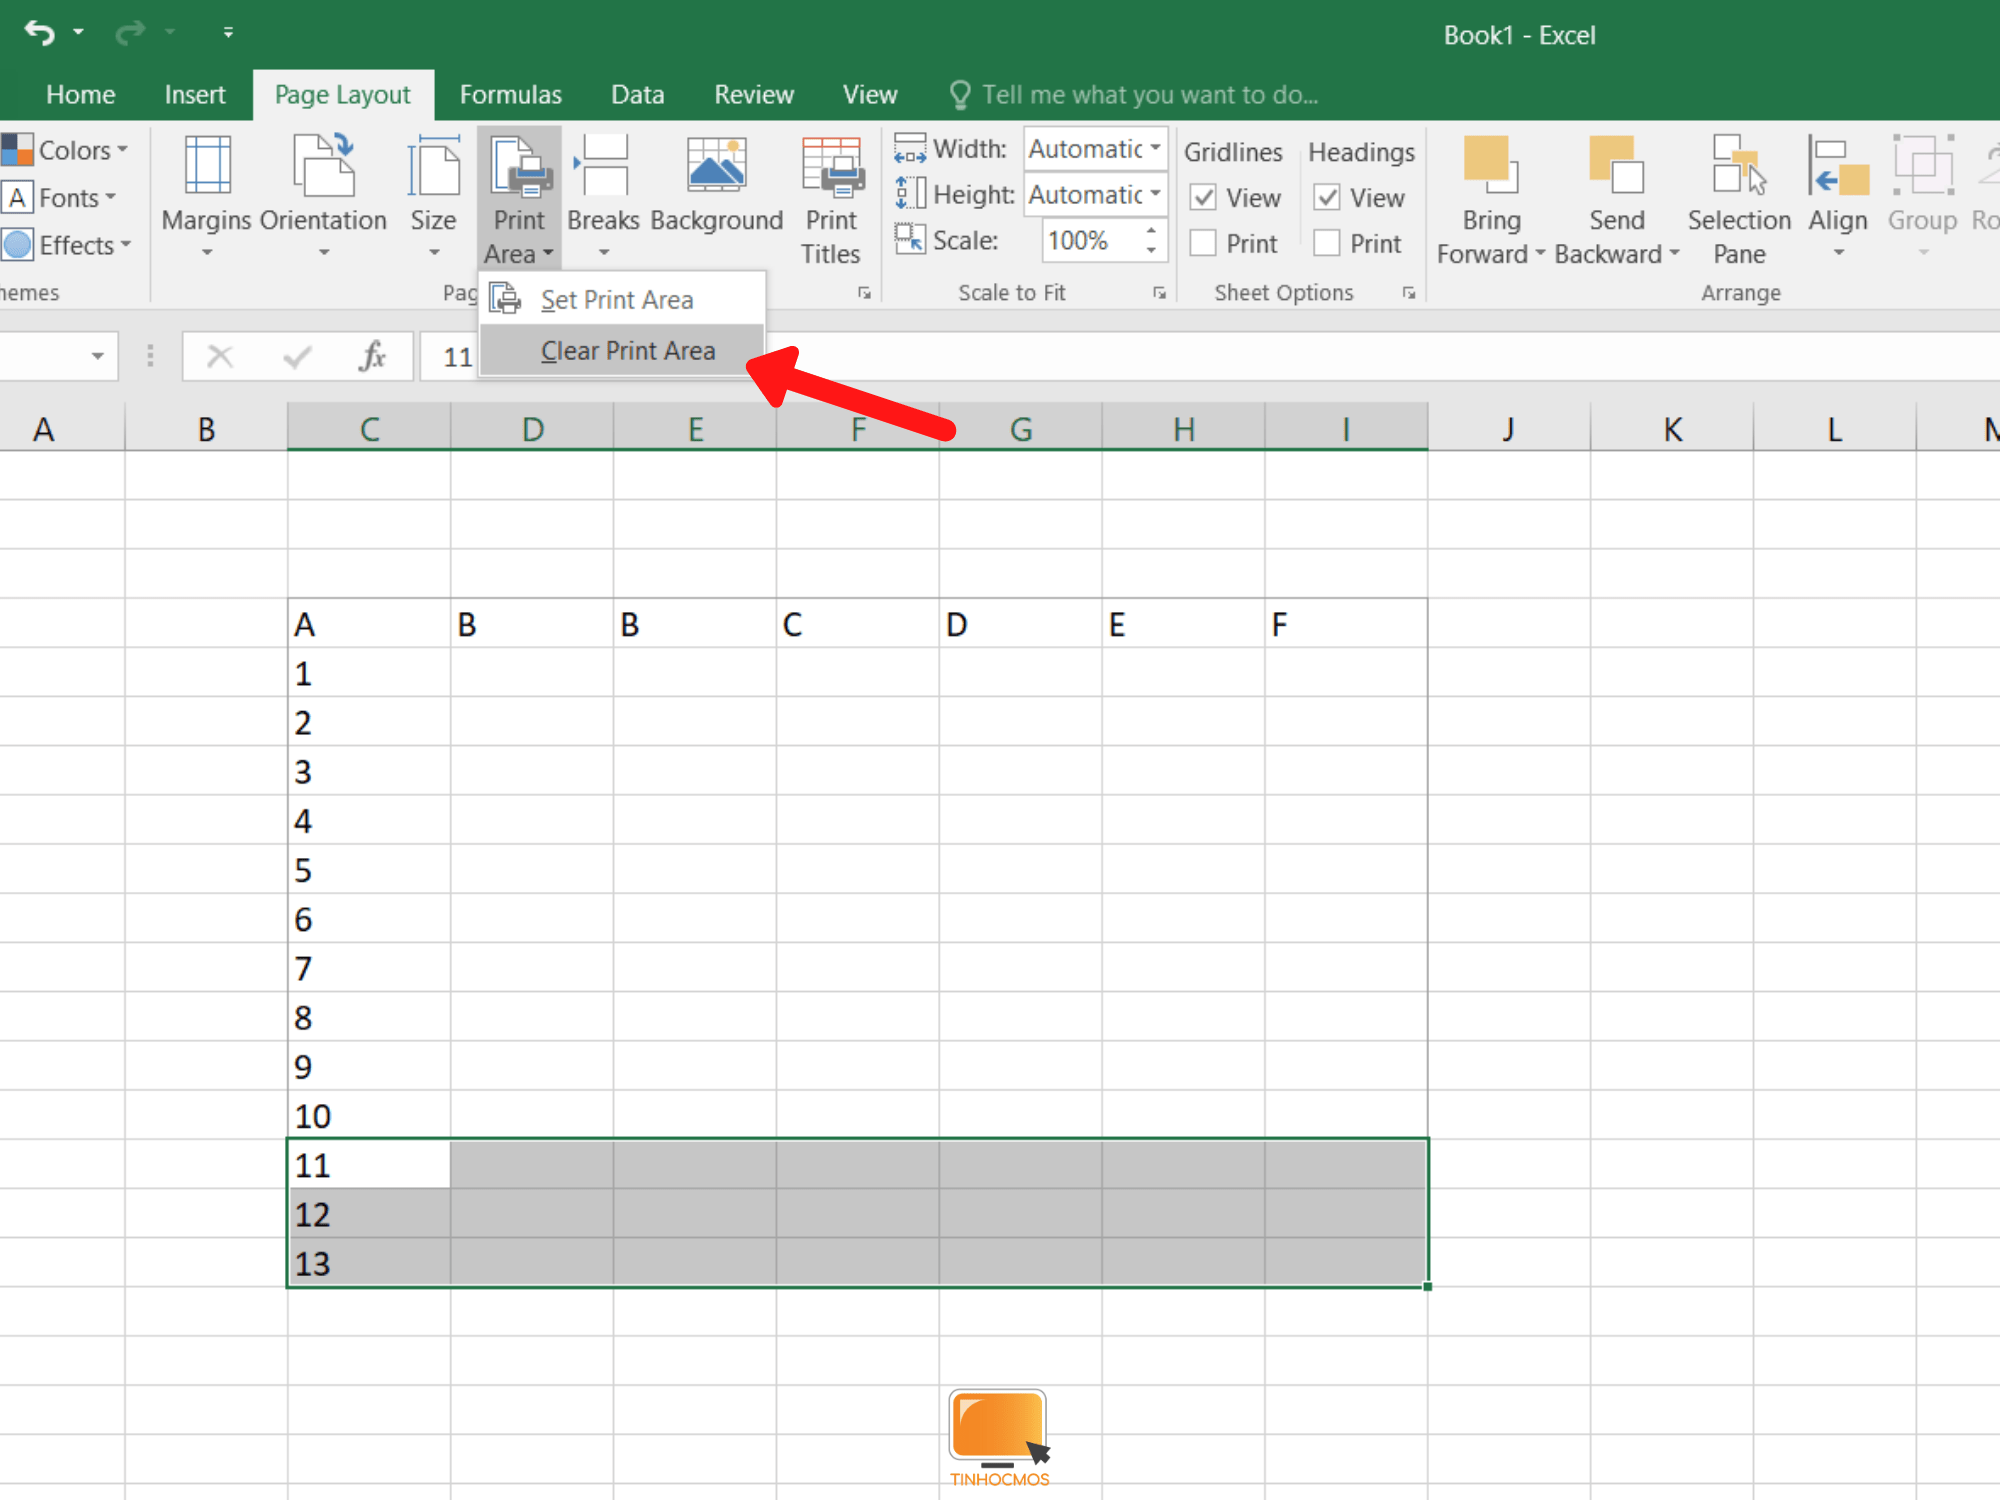 thiết lập vùng in trong excel